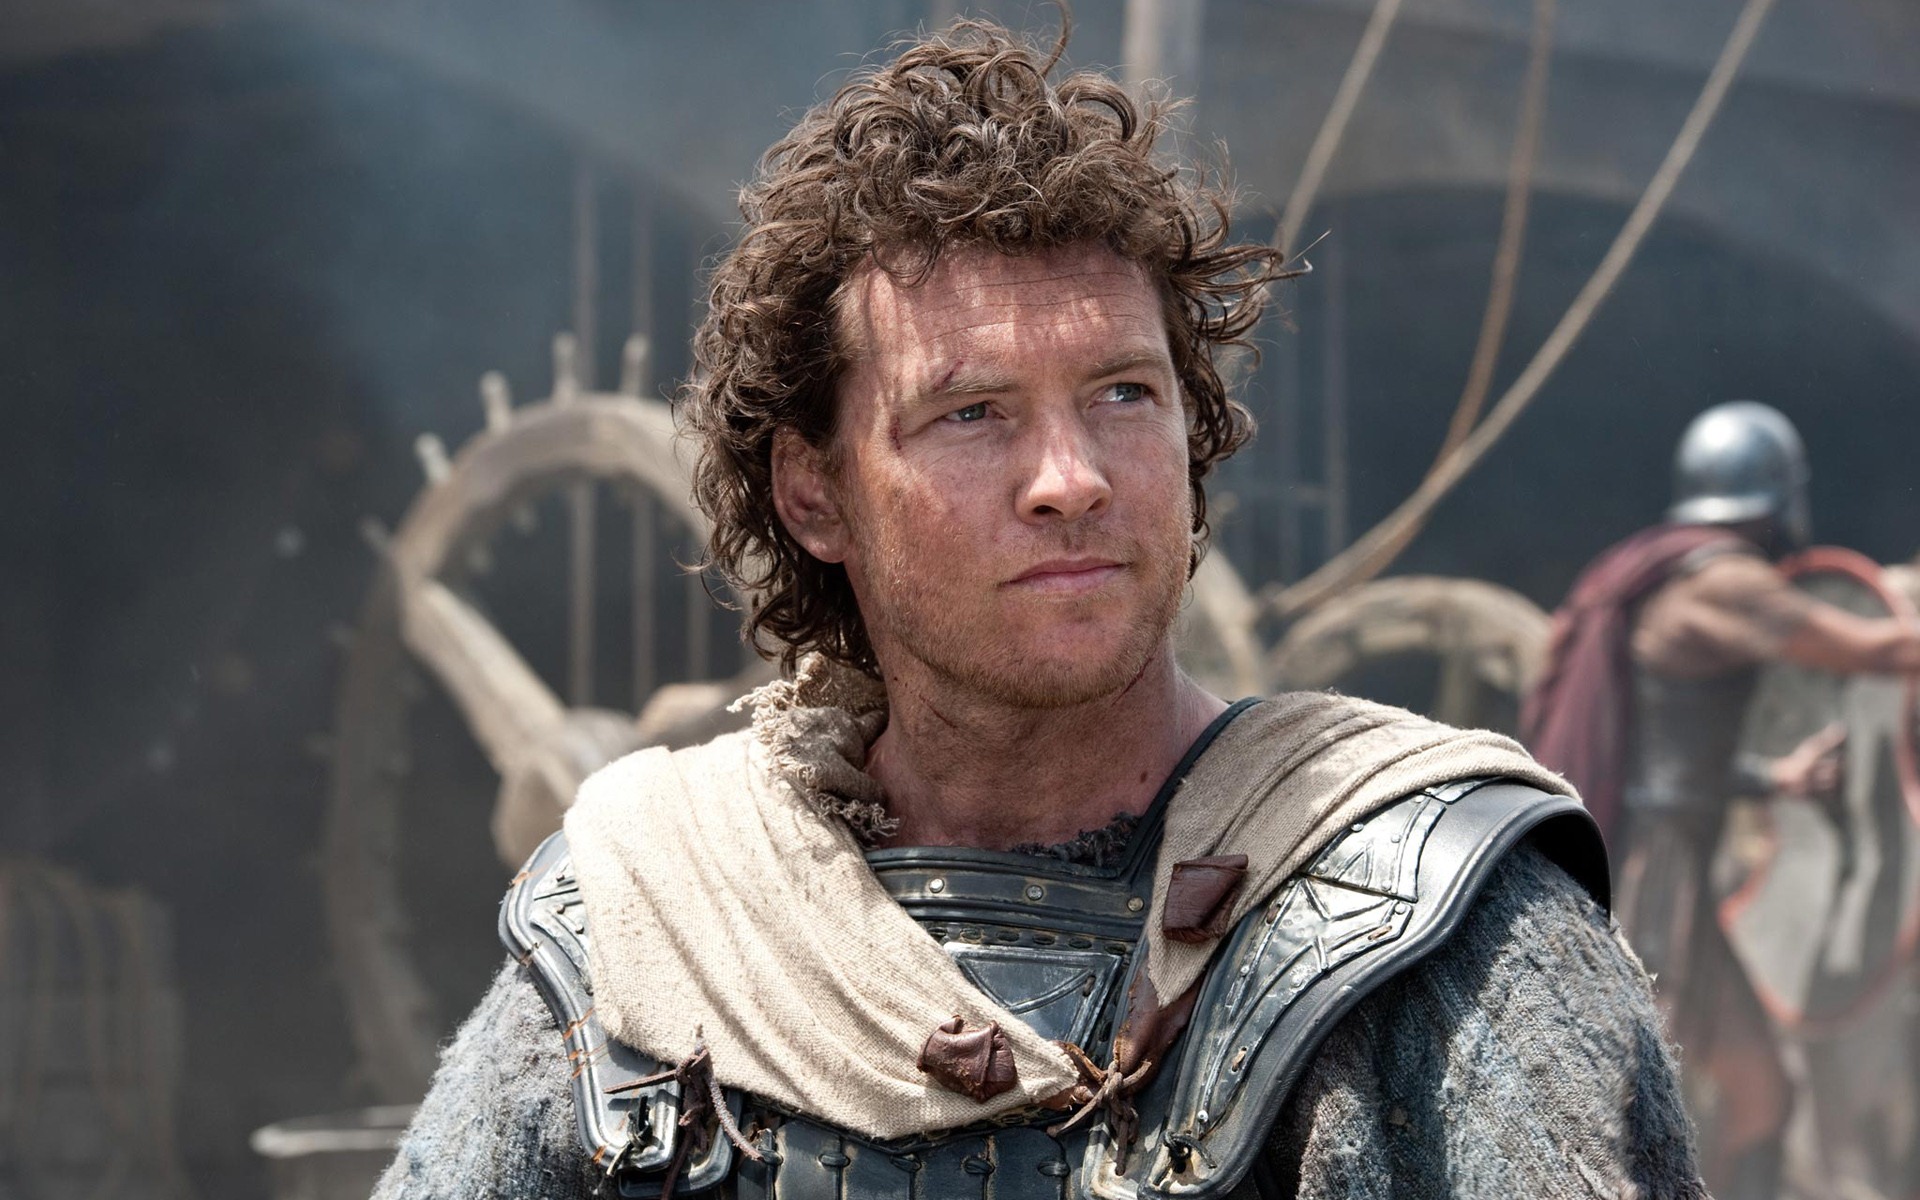 Wrath of the Titans HD Wallpapers #5 - 1920x1200